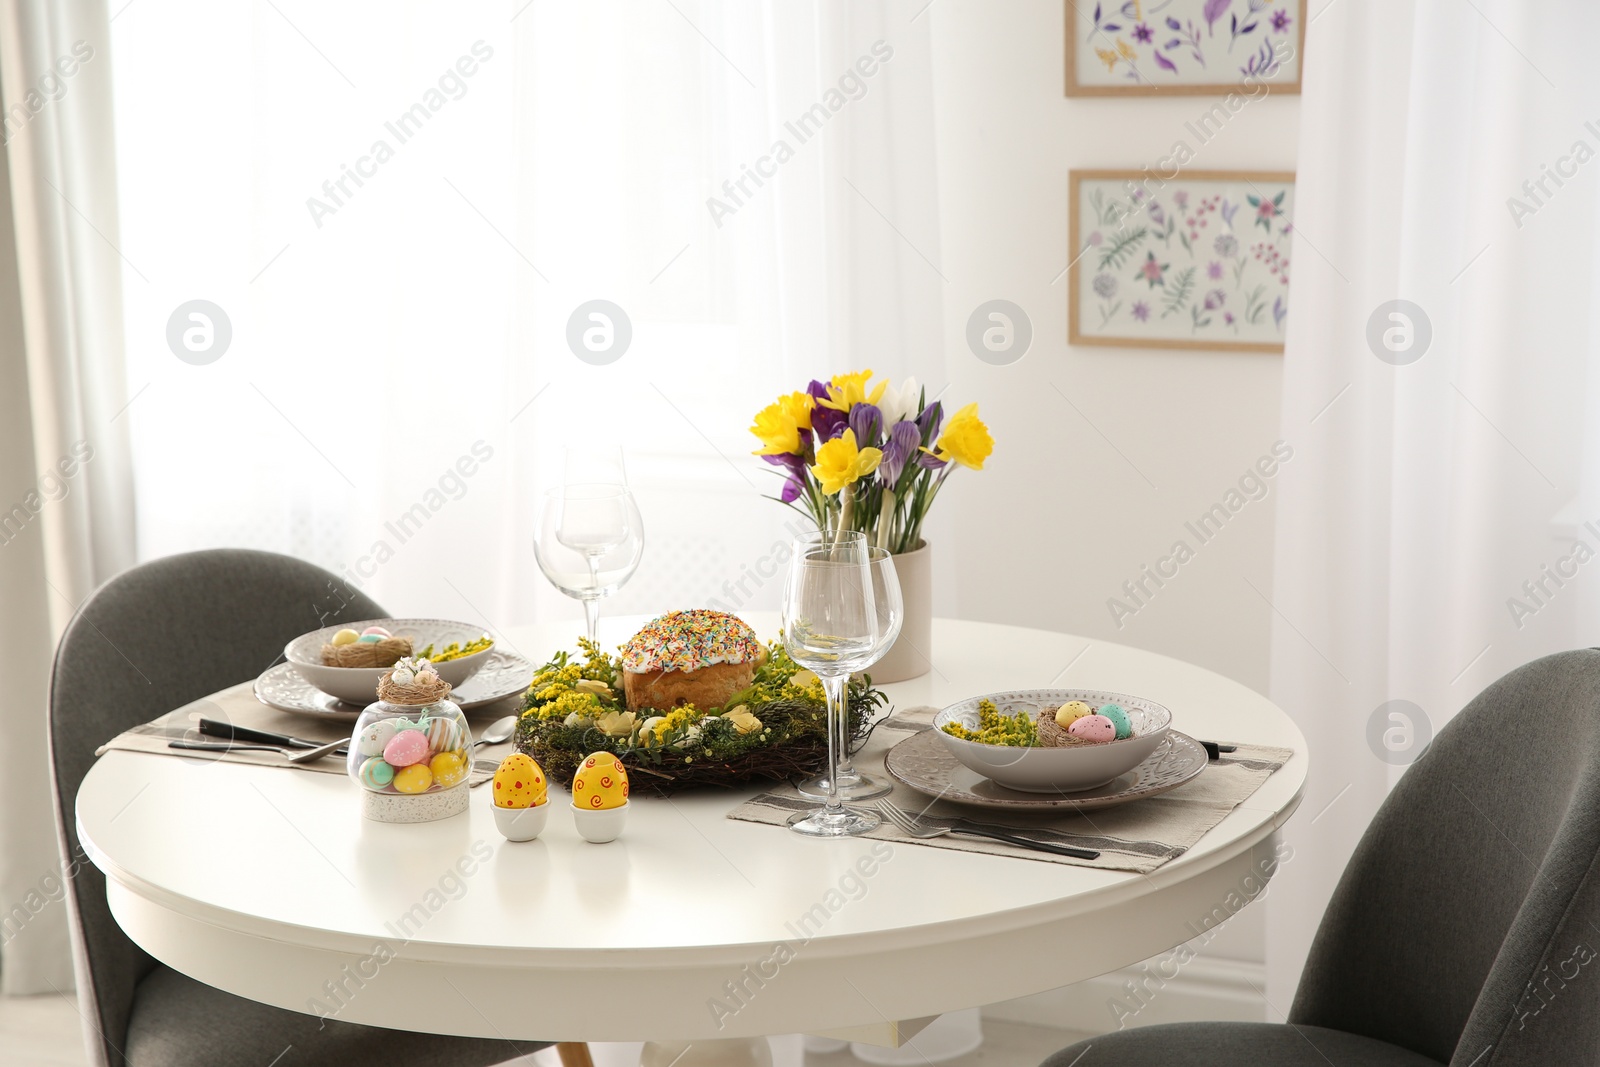 Photo of Festive Easter table setting with beautiful flowers and eggs indoors